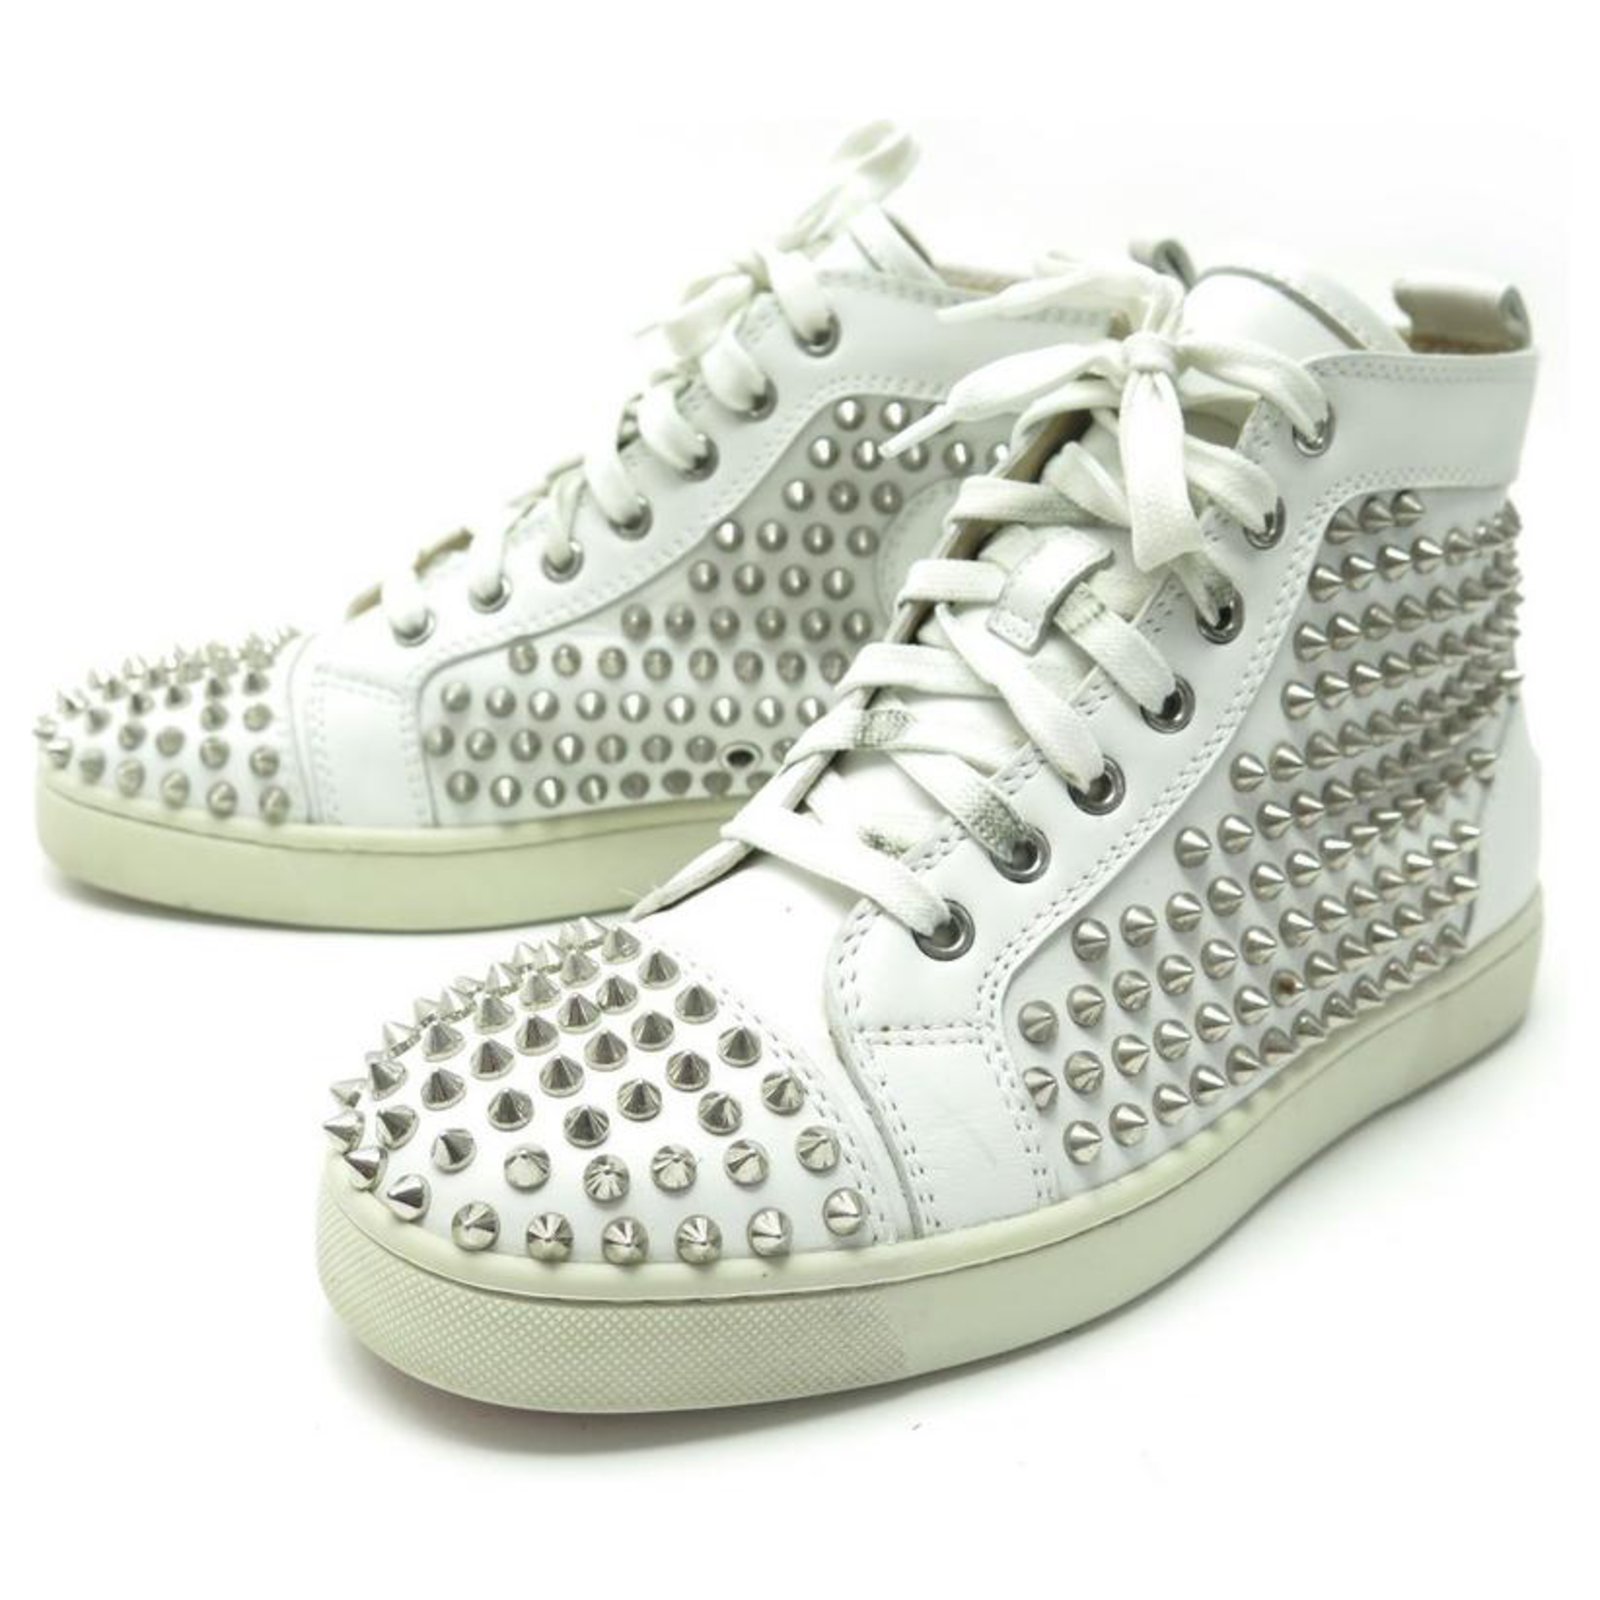 CHRISTIAN LOUBOUTIN, Louis Spike Low Sneakers, Men, White Leather